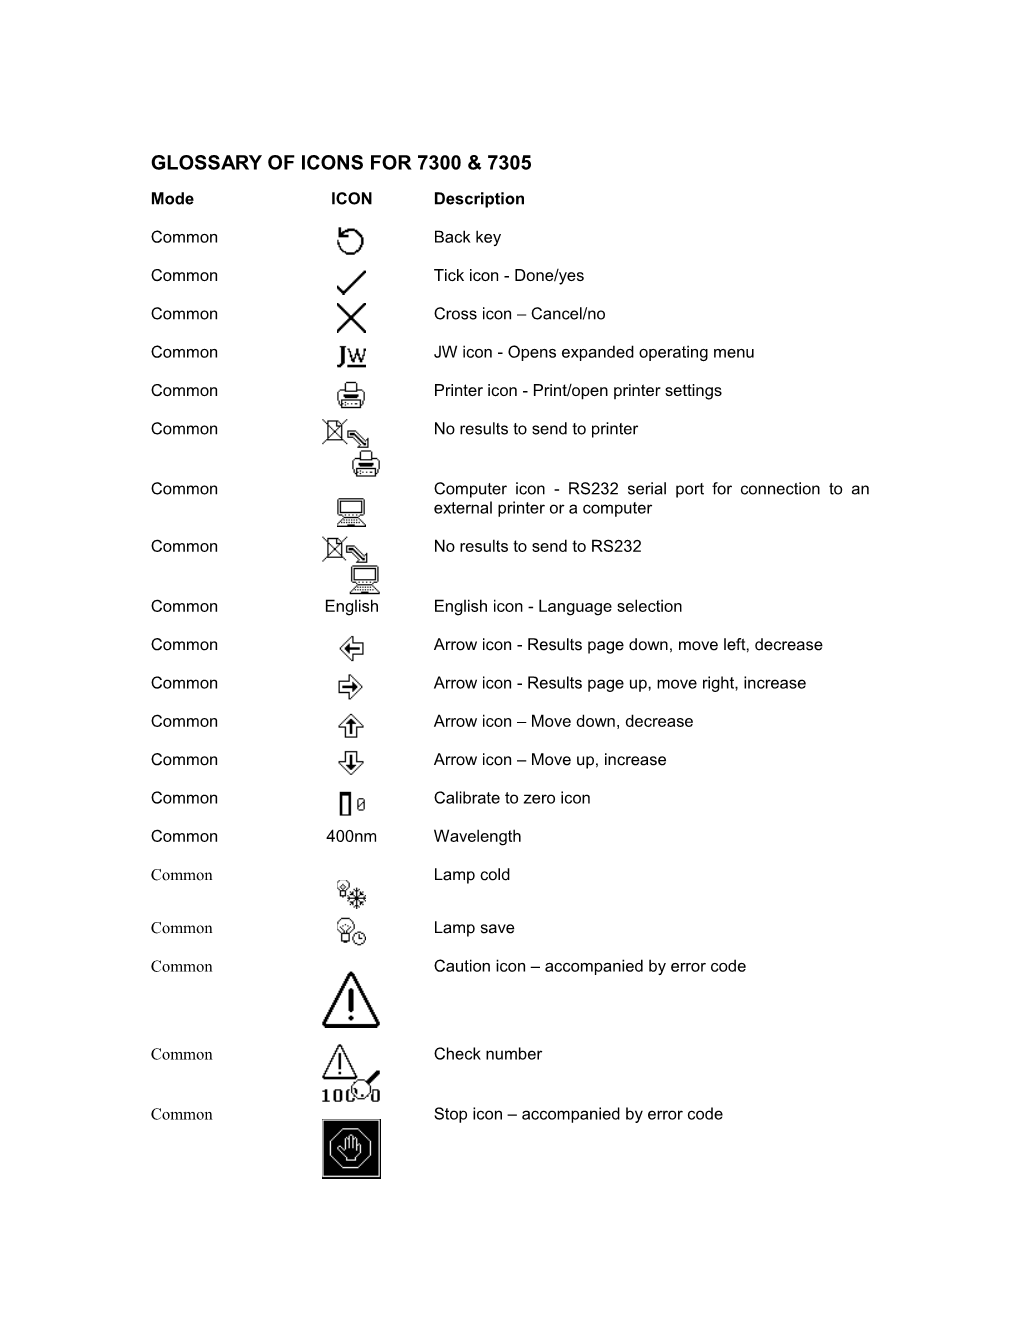 Glossary of Icons for 7300 & 7305